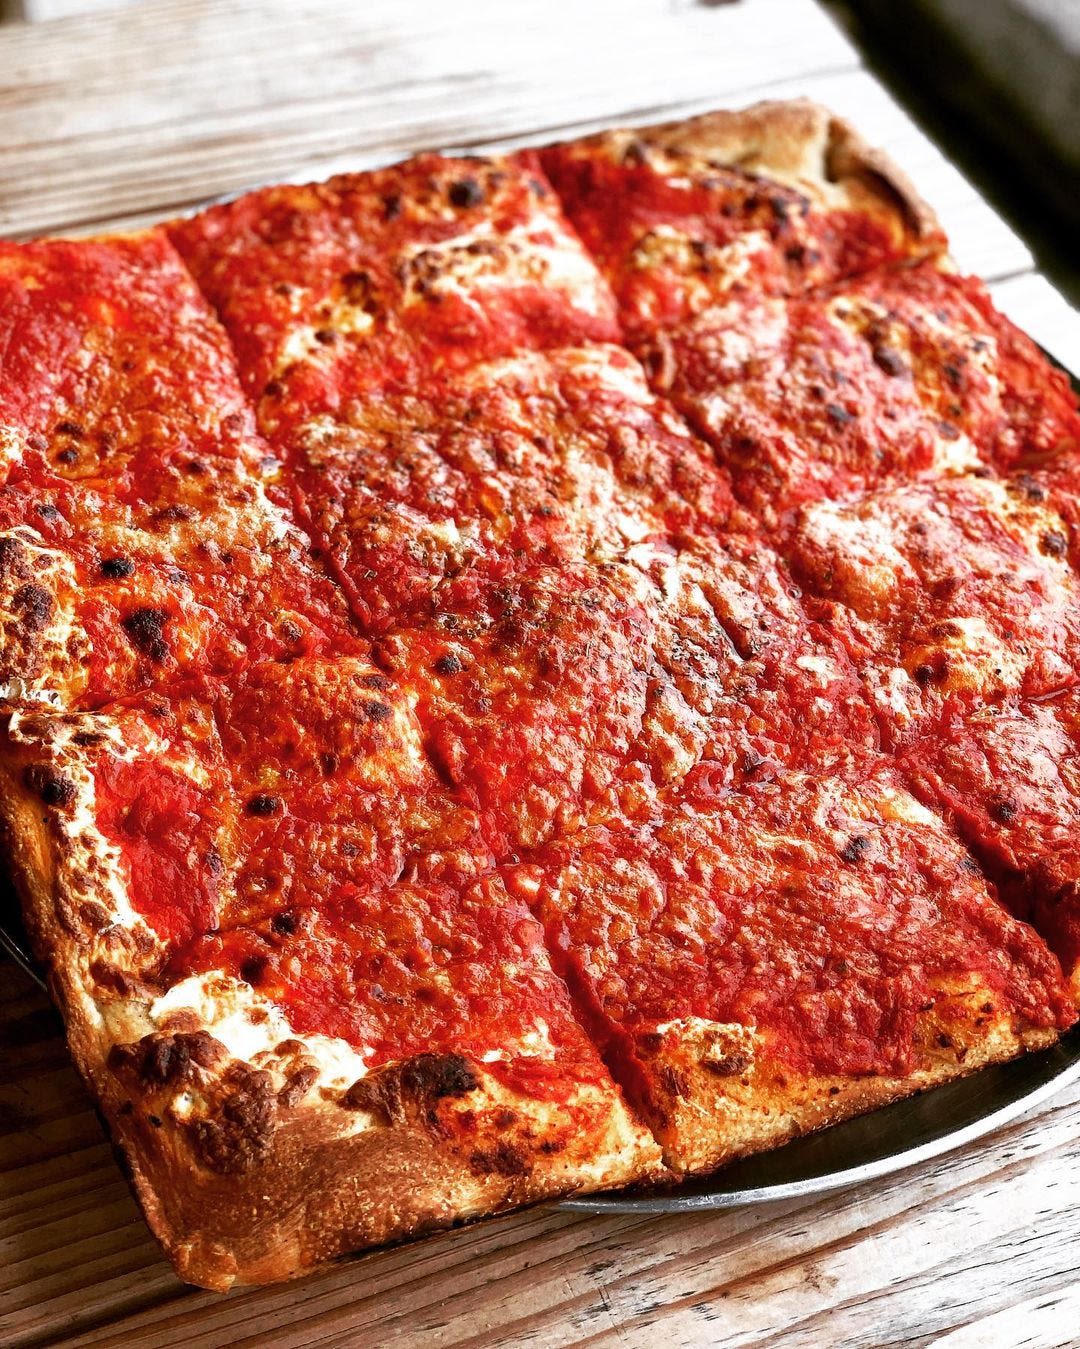 Dave Portnoy of One Bite Pizza has visited these Shore spots. Here's how they rated